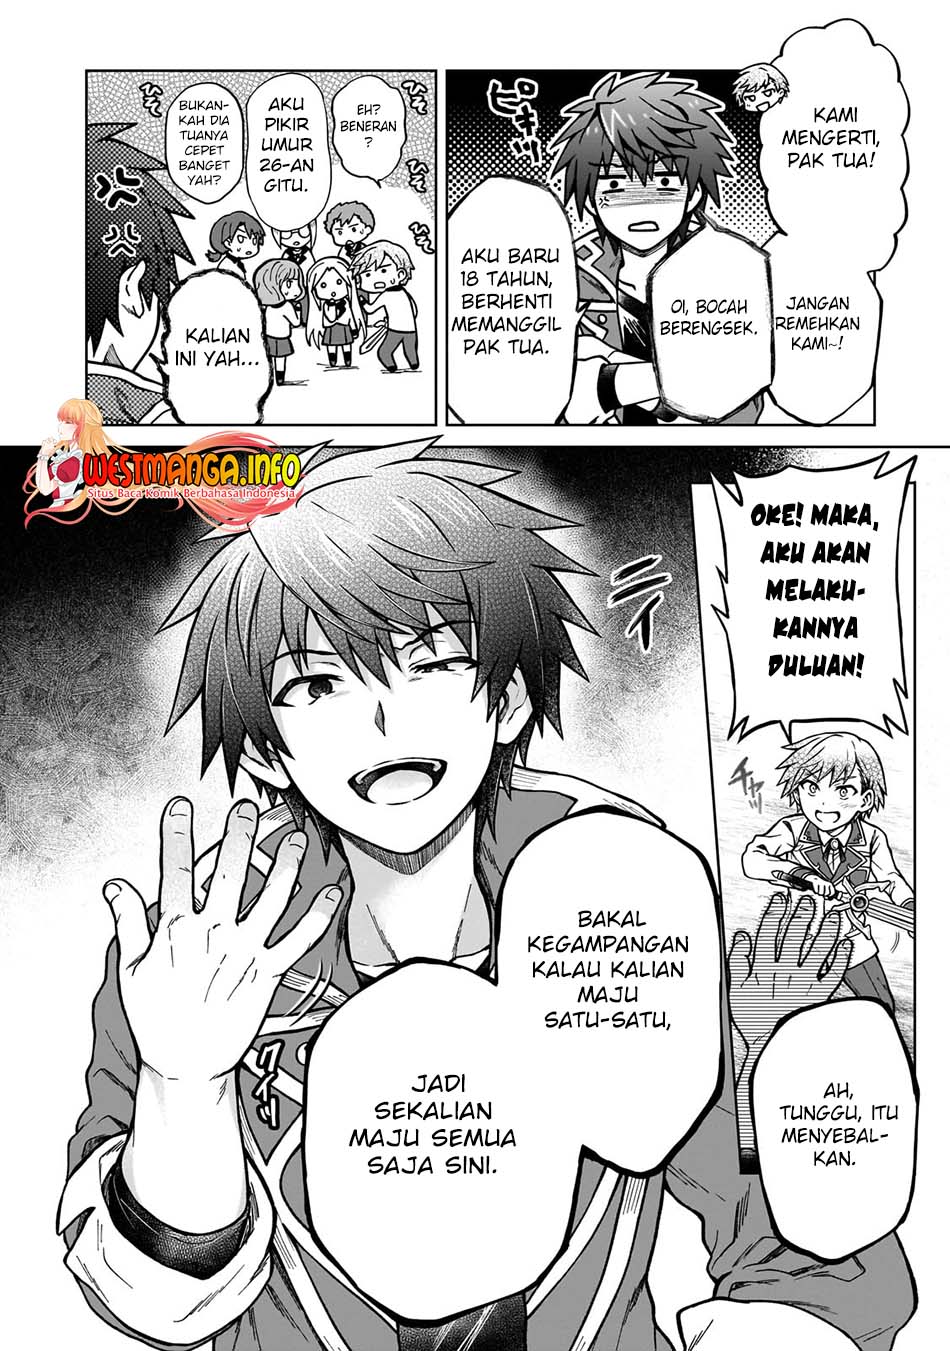 Dilarang COPAS - situs resmi www.mangacanblog.com - Komik d rank adventurer invited by a brave party and the stalking princess 016 - chapter 16 17 Indonesia d rank adventurer invited by a brave party and the stalking princess 016 - chapter 16 Terbaru 16|Baca Manga Komik Indonesia|Mangacan